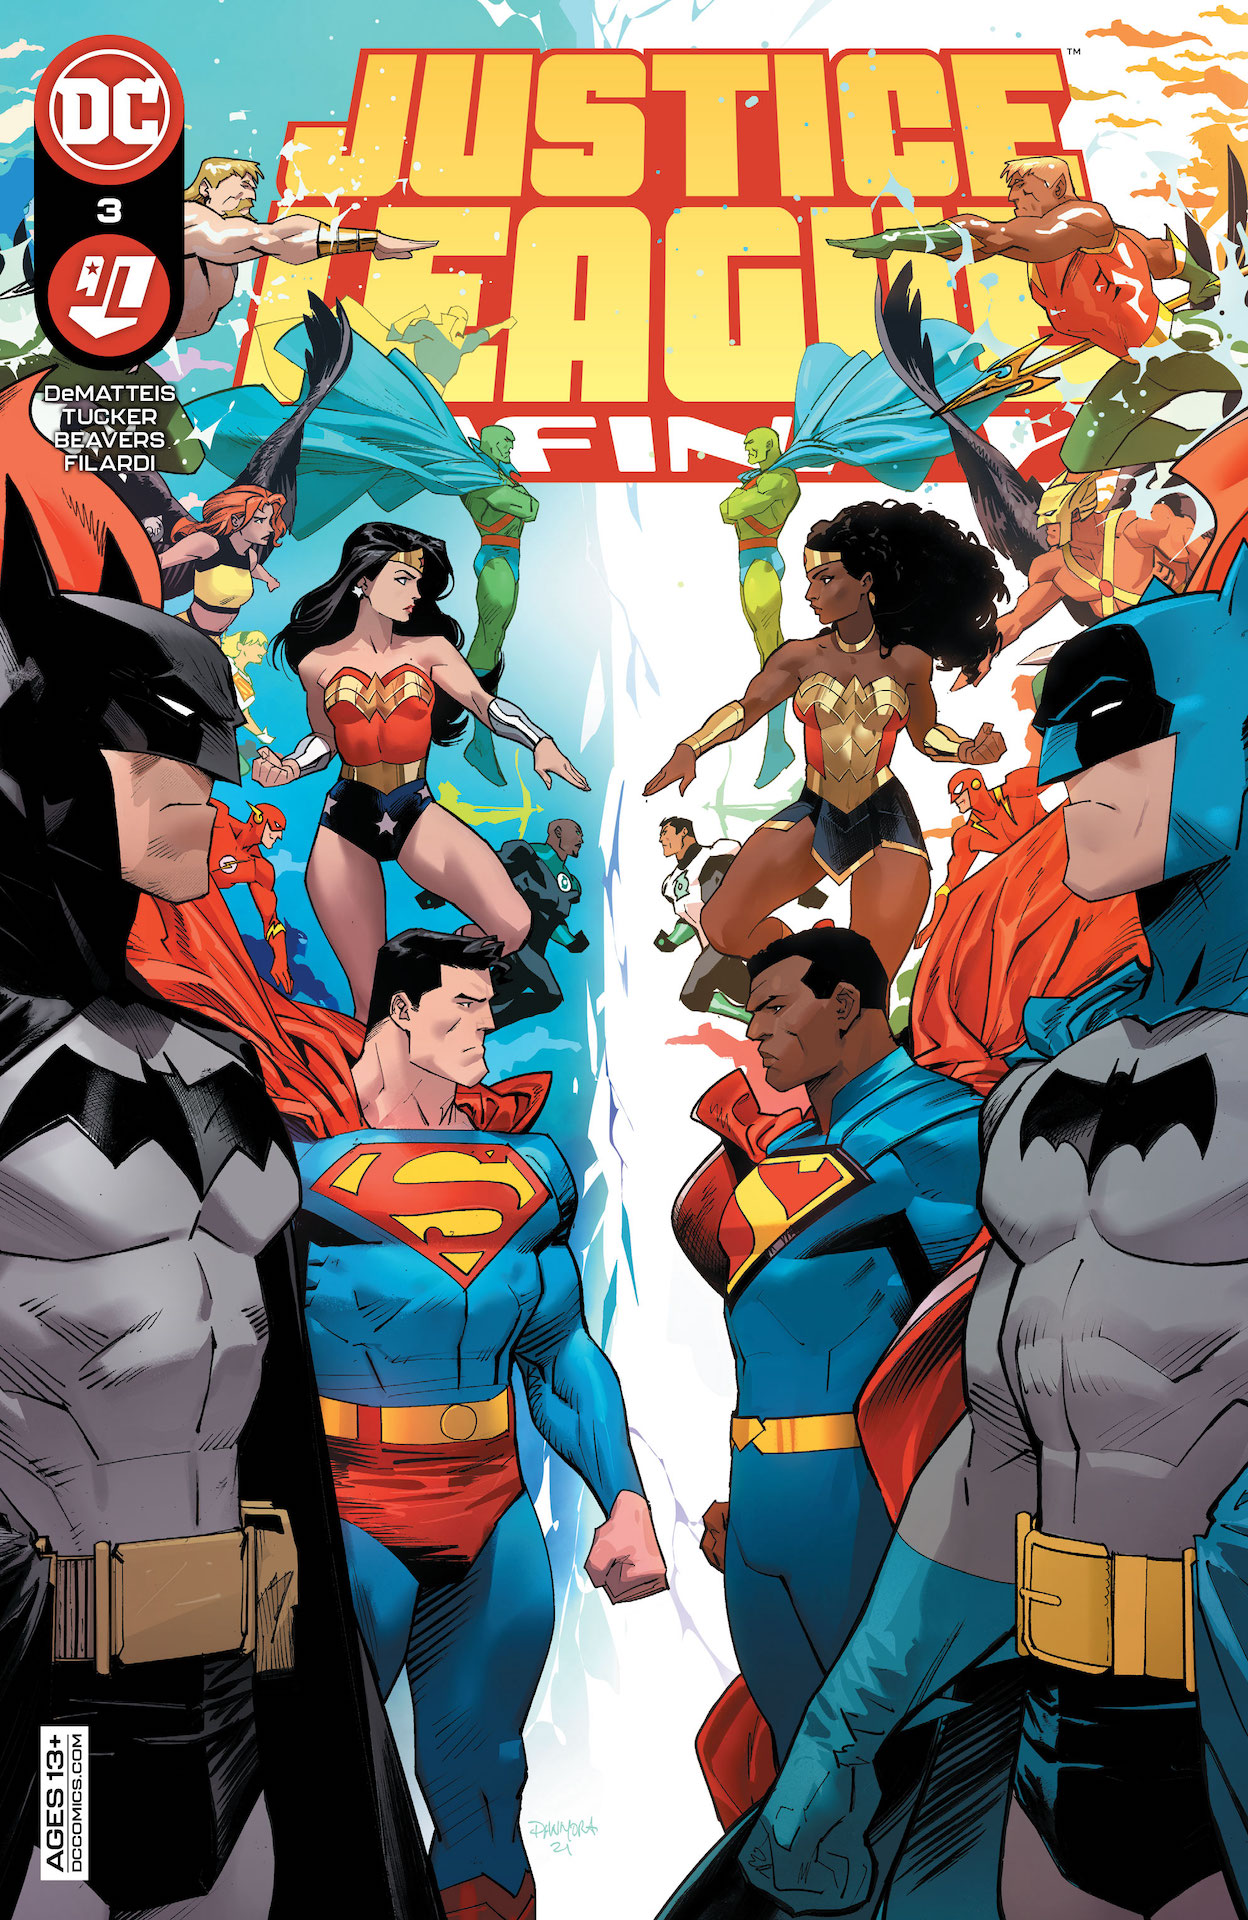 DC Preview: Justice League Infinity #3